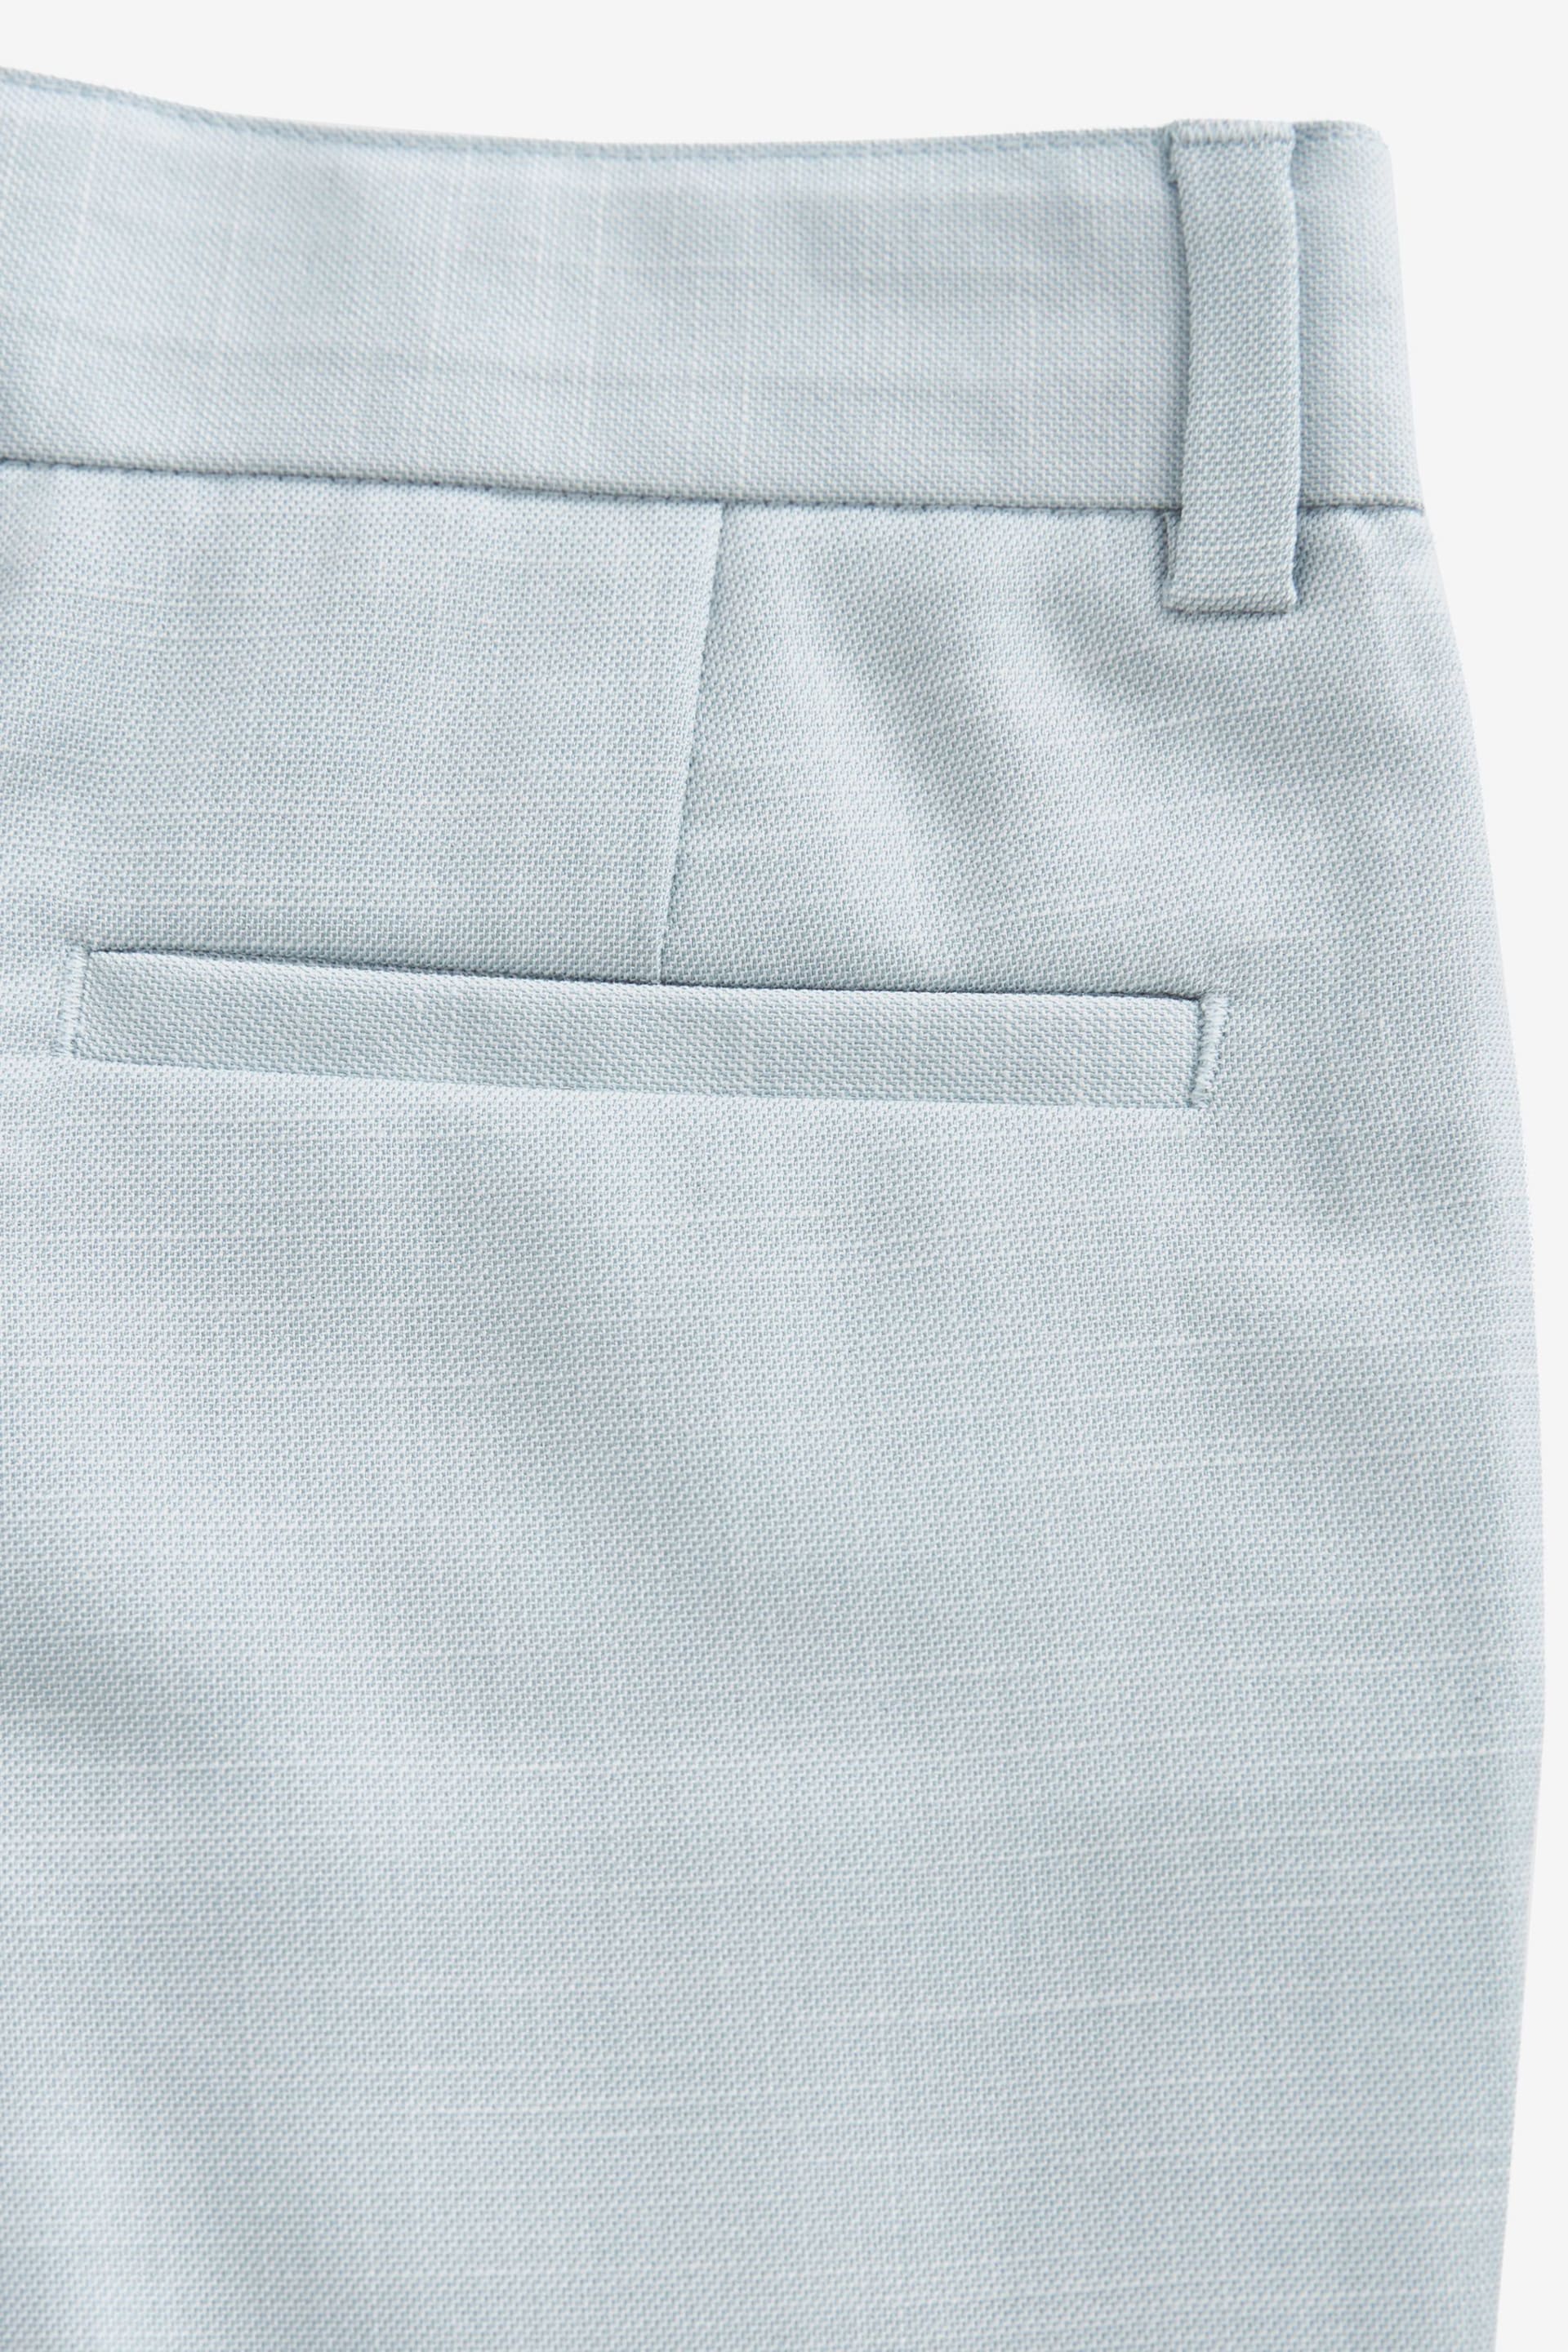 Baker by Ted Baker Suit Trousers - Image 9 of 10